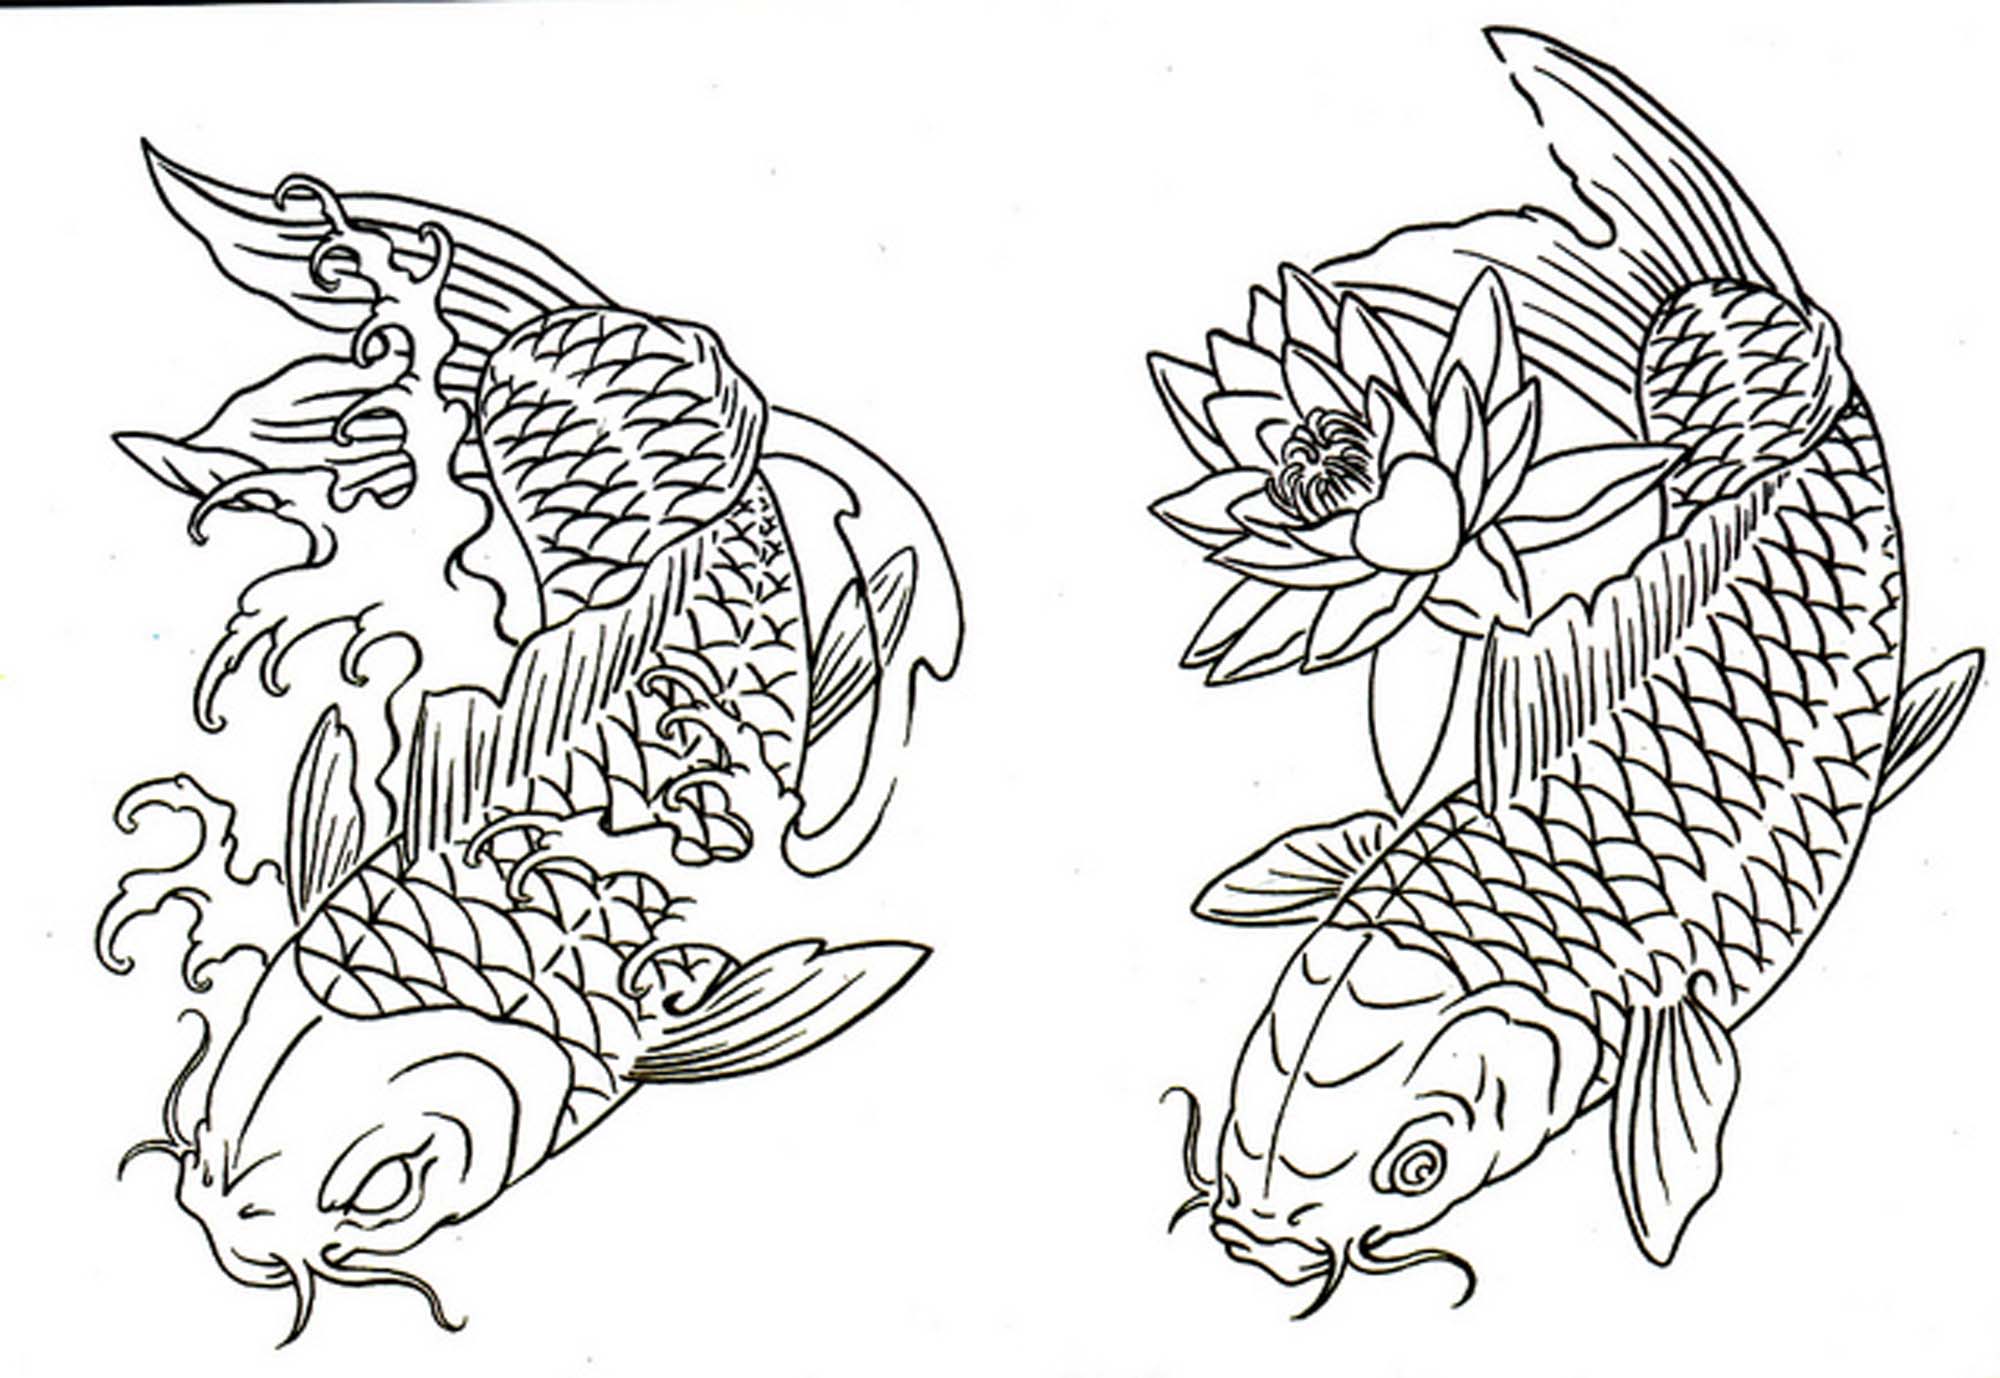 koi-fish-coloring-pages